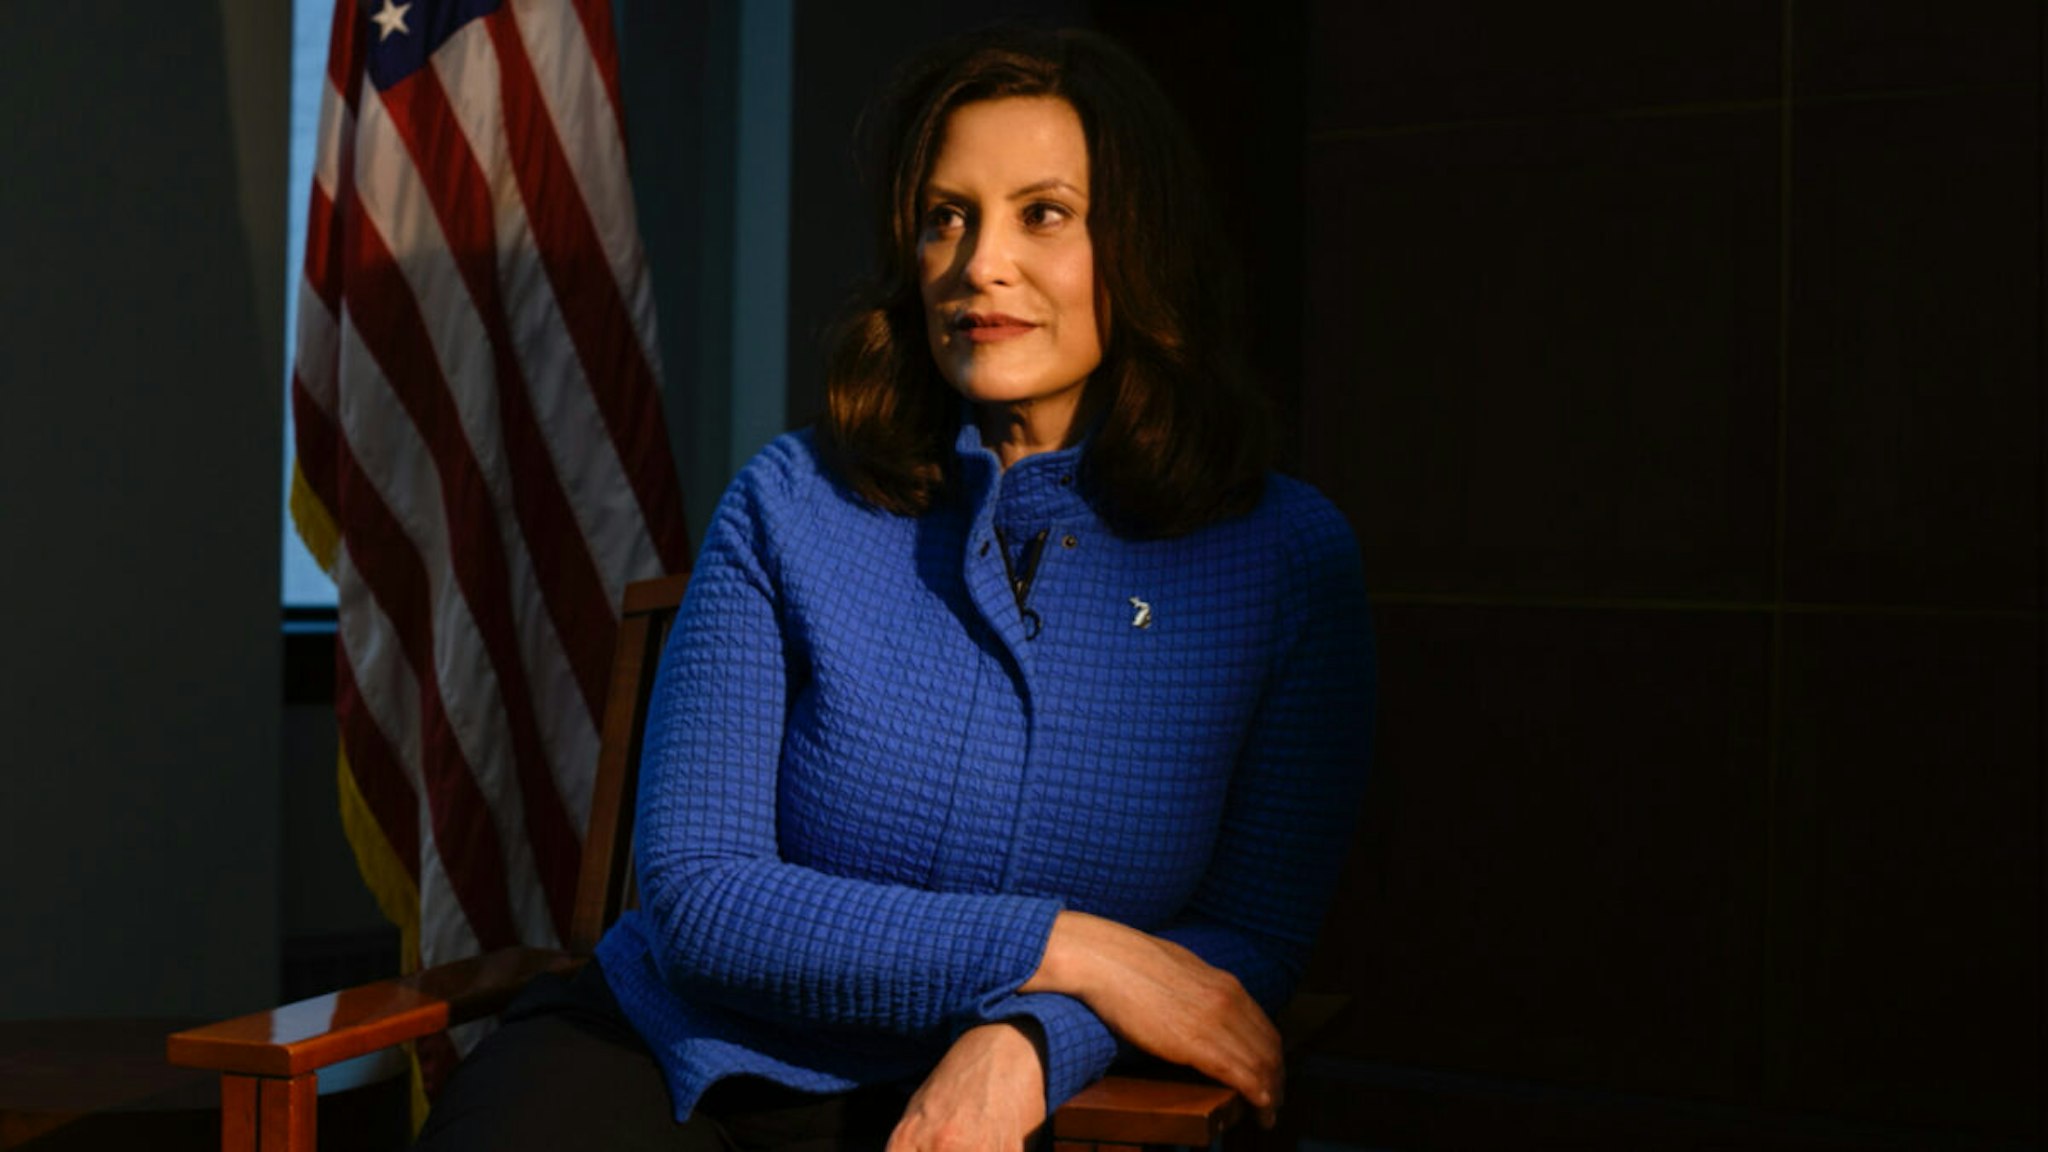 Michigan Governor Gretchen Whitmer at the Romney Building where her office is located in Lansing, Mich., on May 18, 2020.